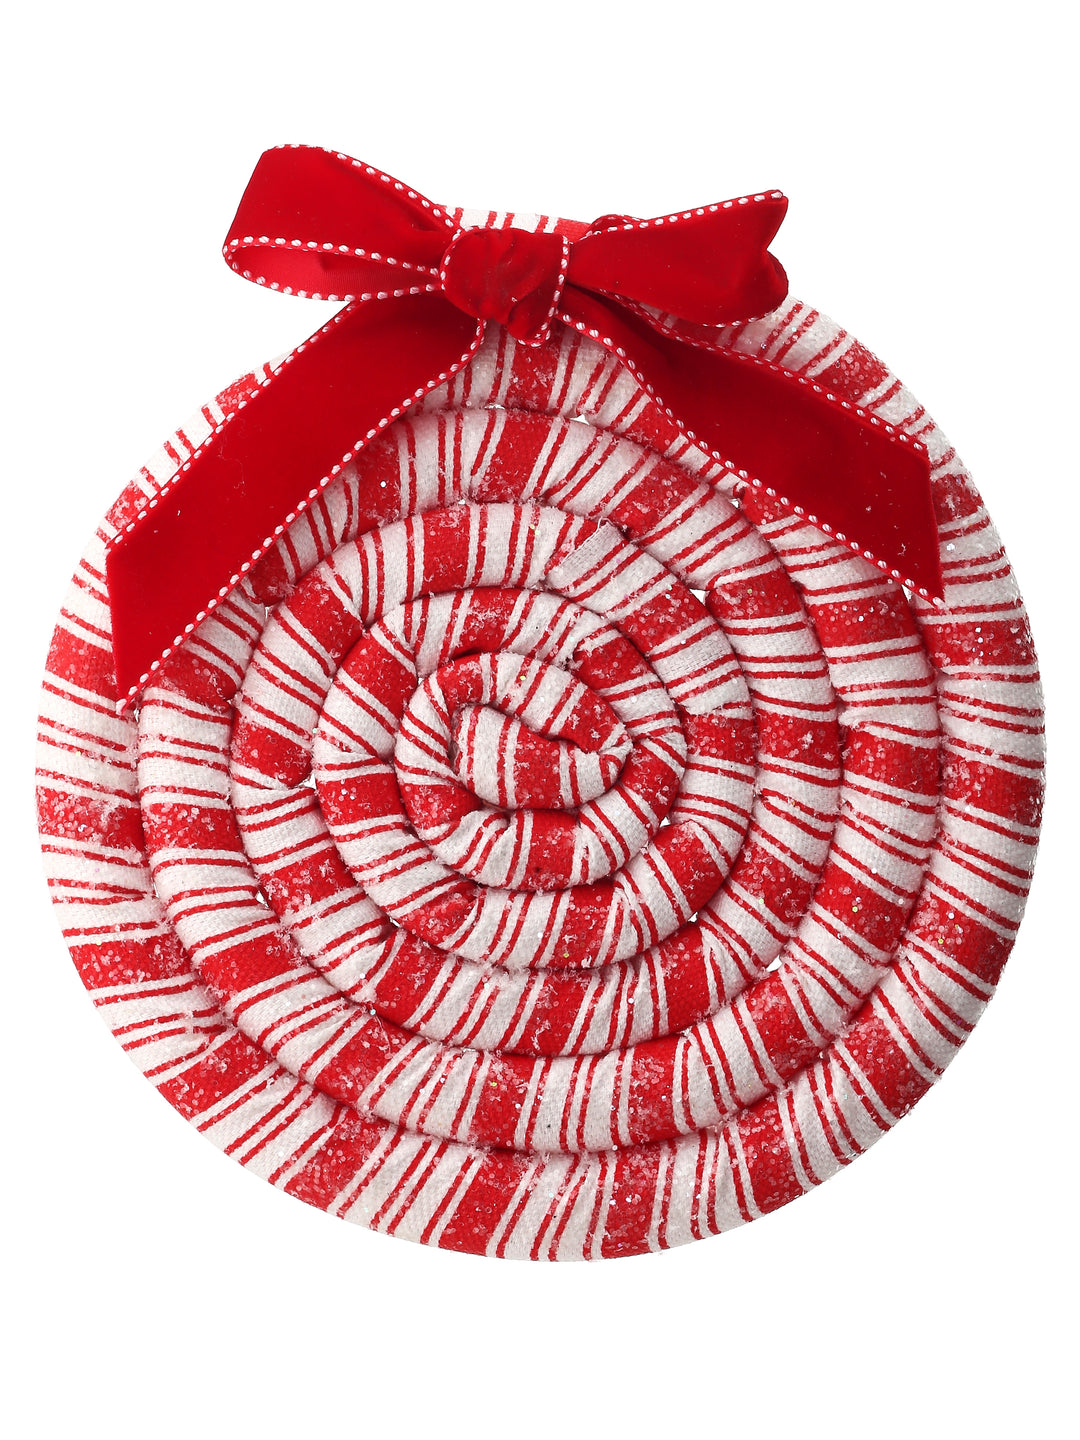 Regency 8.5" Frosty Peppermint Disc w/Bow Ornament/Attachment in Red/White